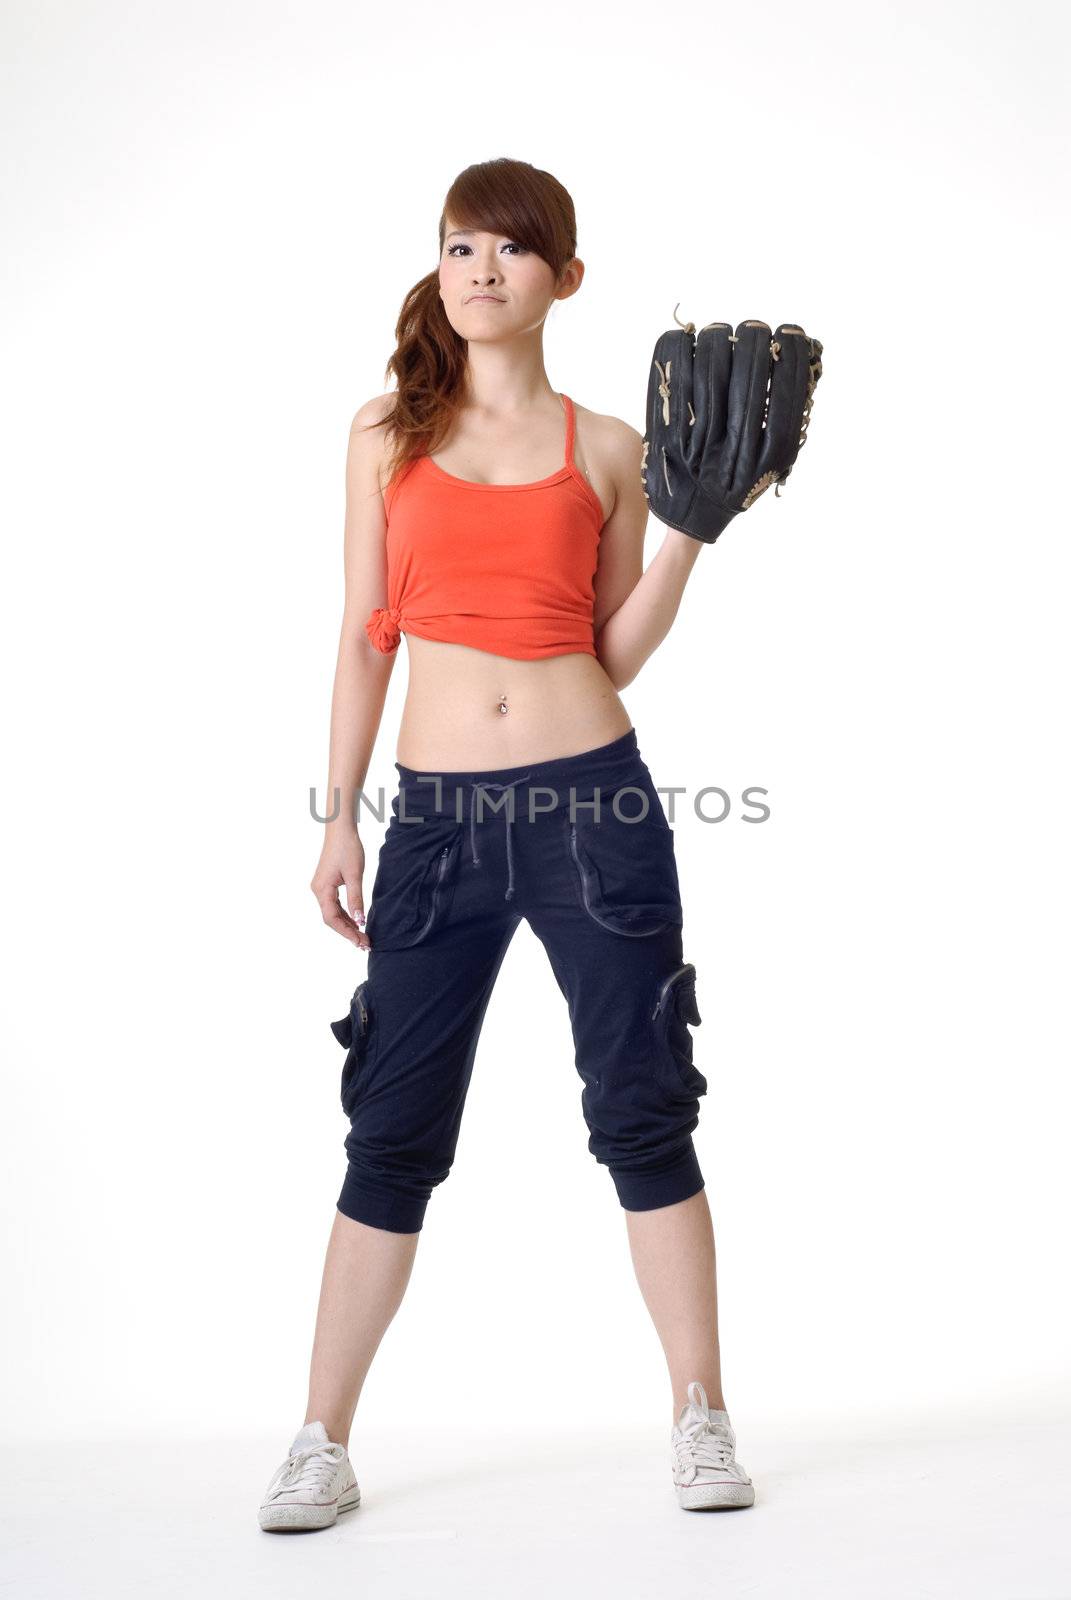 Portrait of sport girl with baseball glove isolated on white.